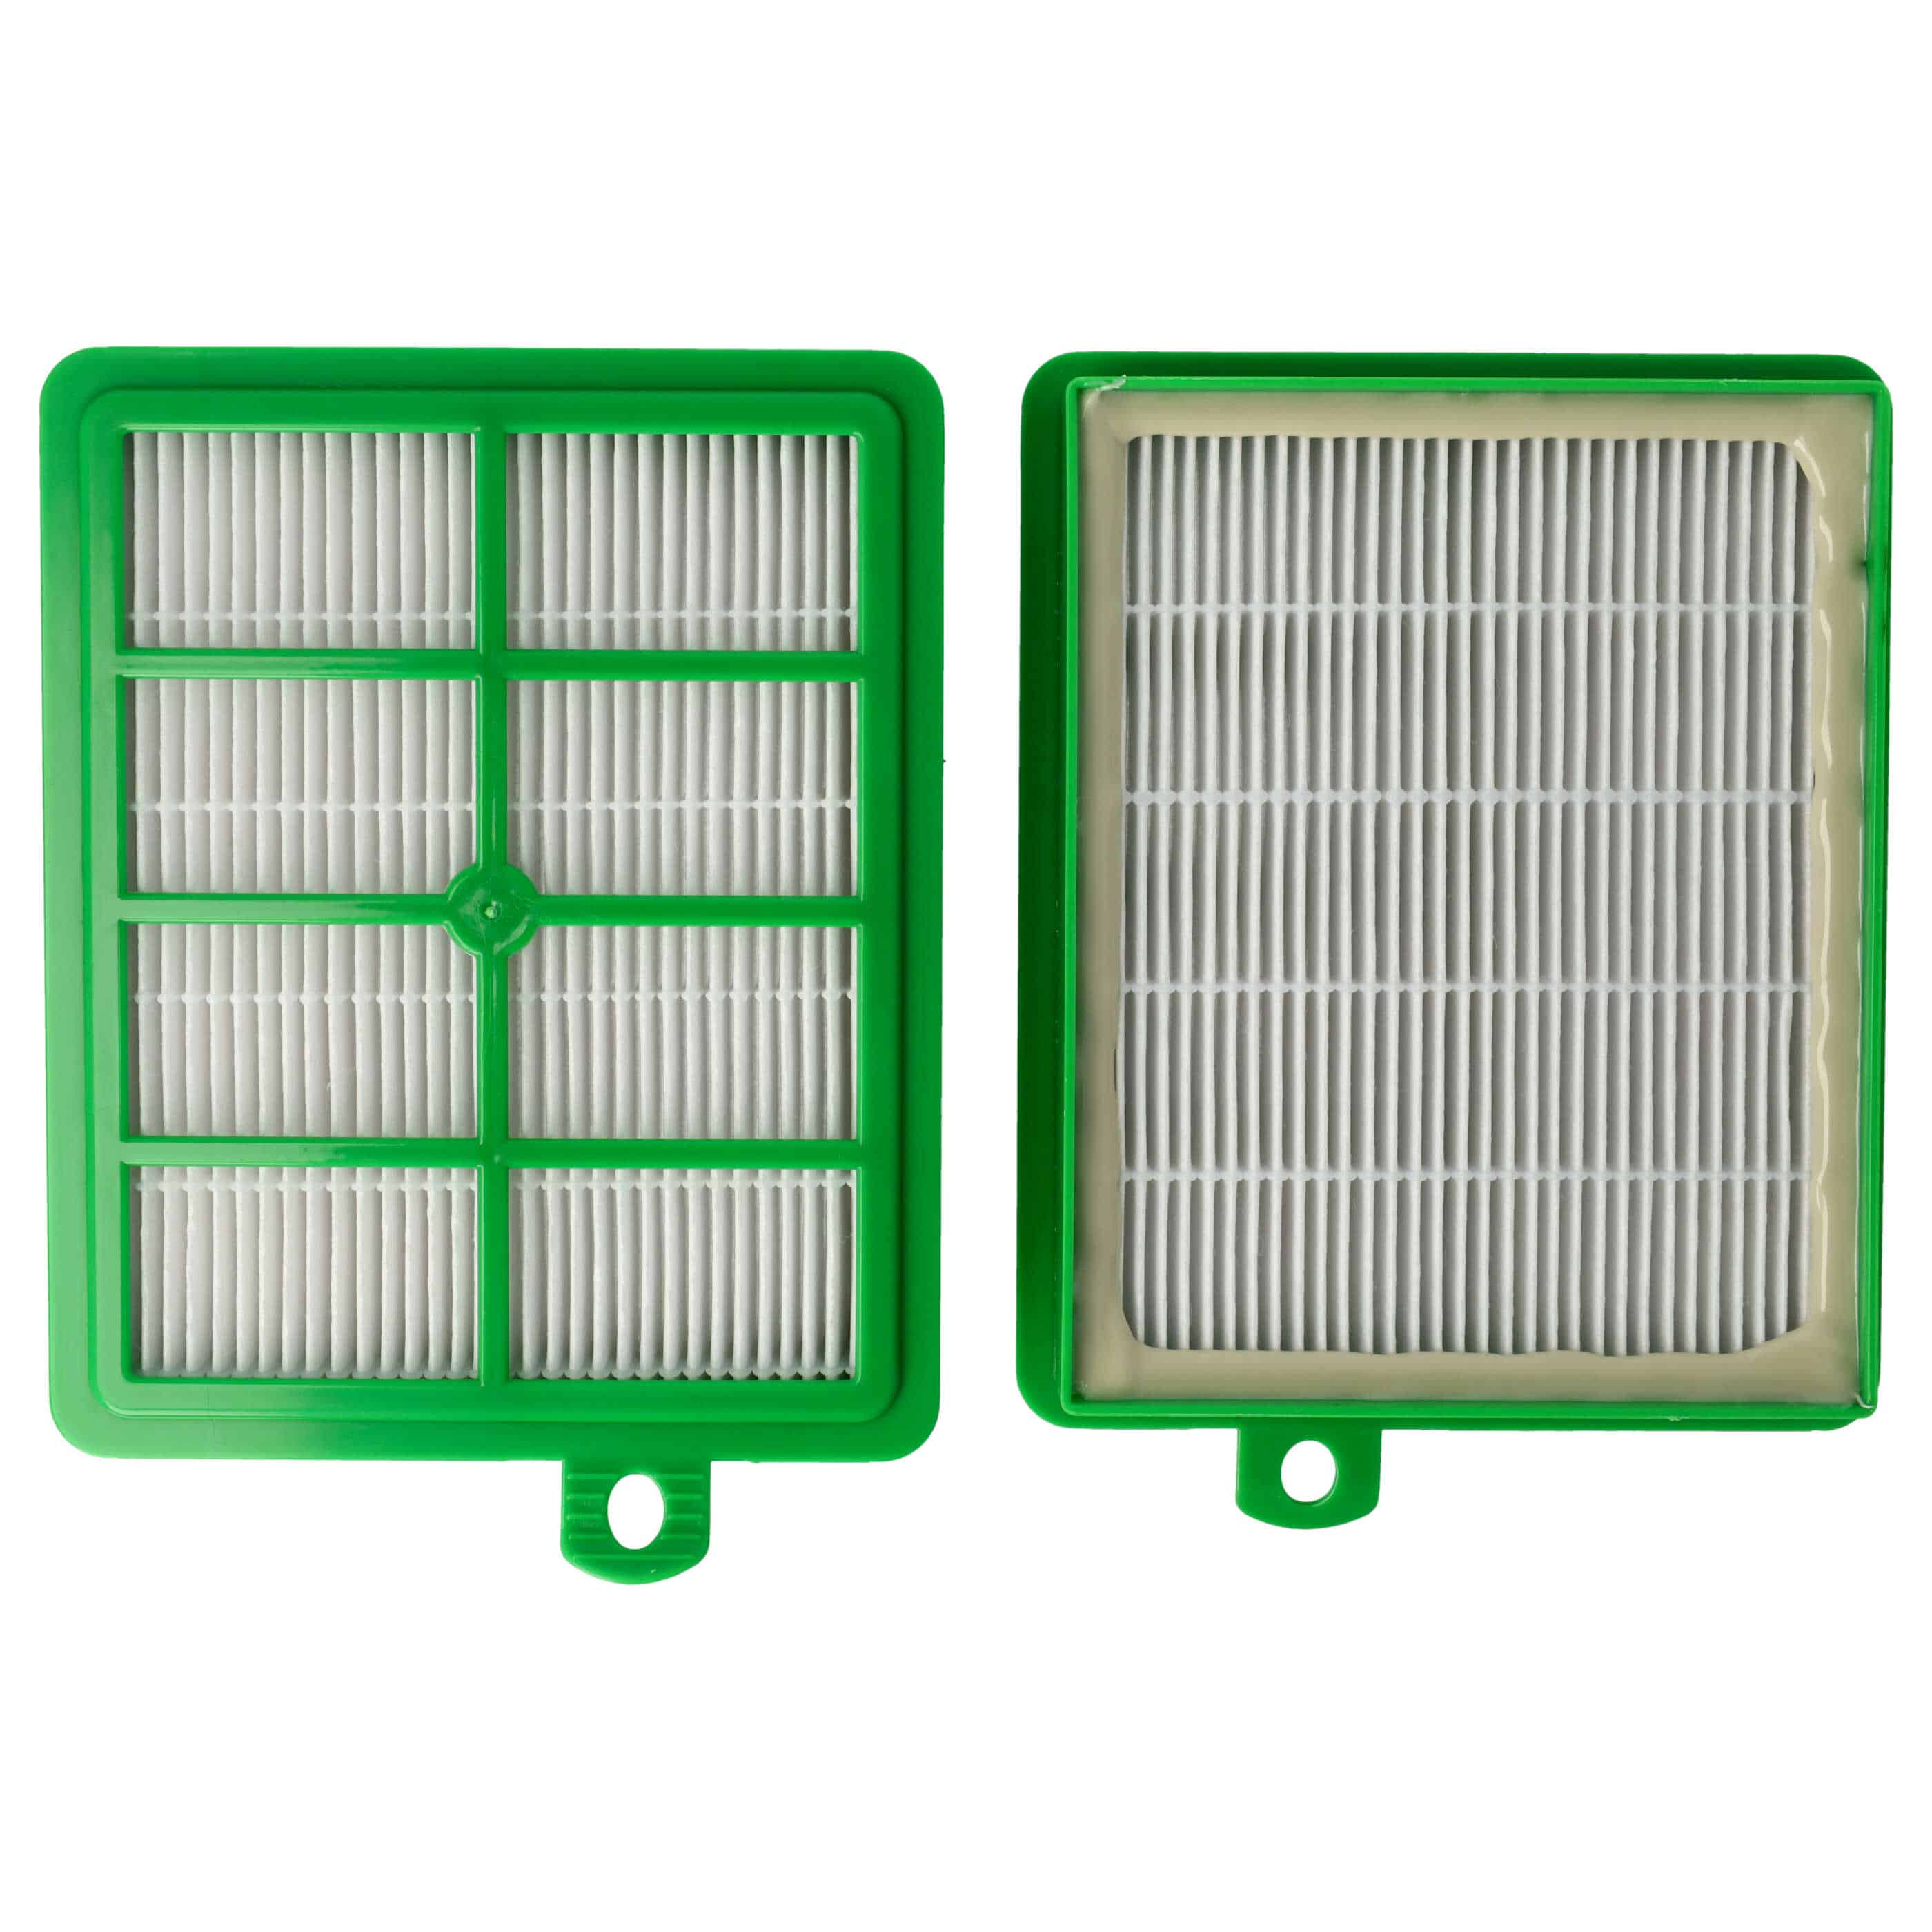 2x HEPA filter replaces AEG ASF1W, AFS1, E 12, AFS1W, AEFG12W for PhilipsVacuum Cleaner